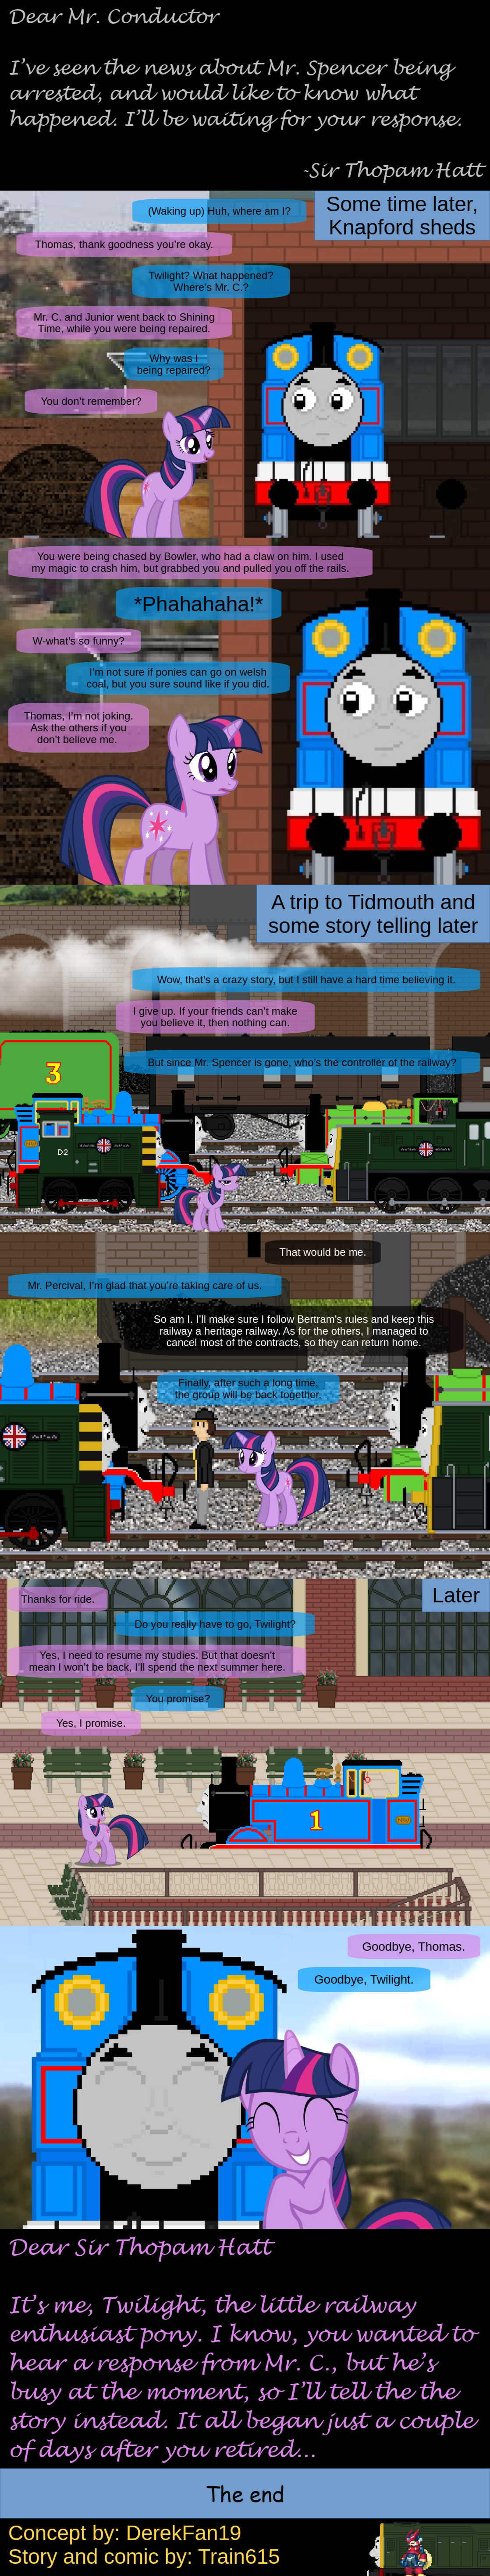 Fanfiction and stories on Sodor-Dieselworks - DeviantArt